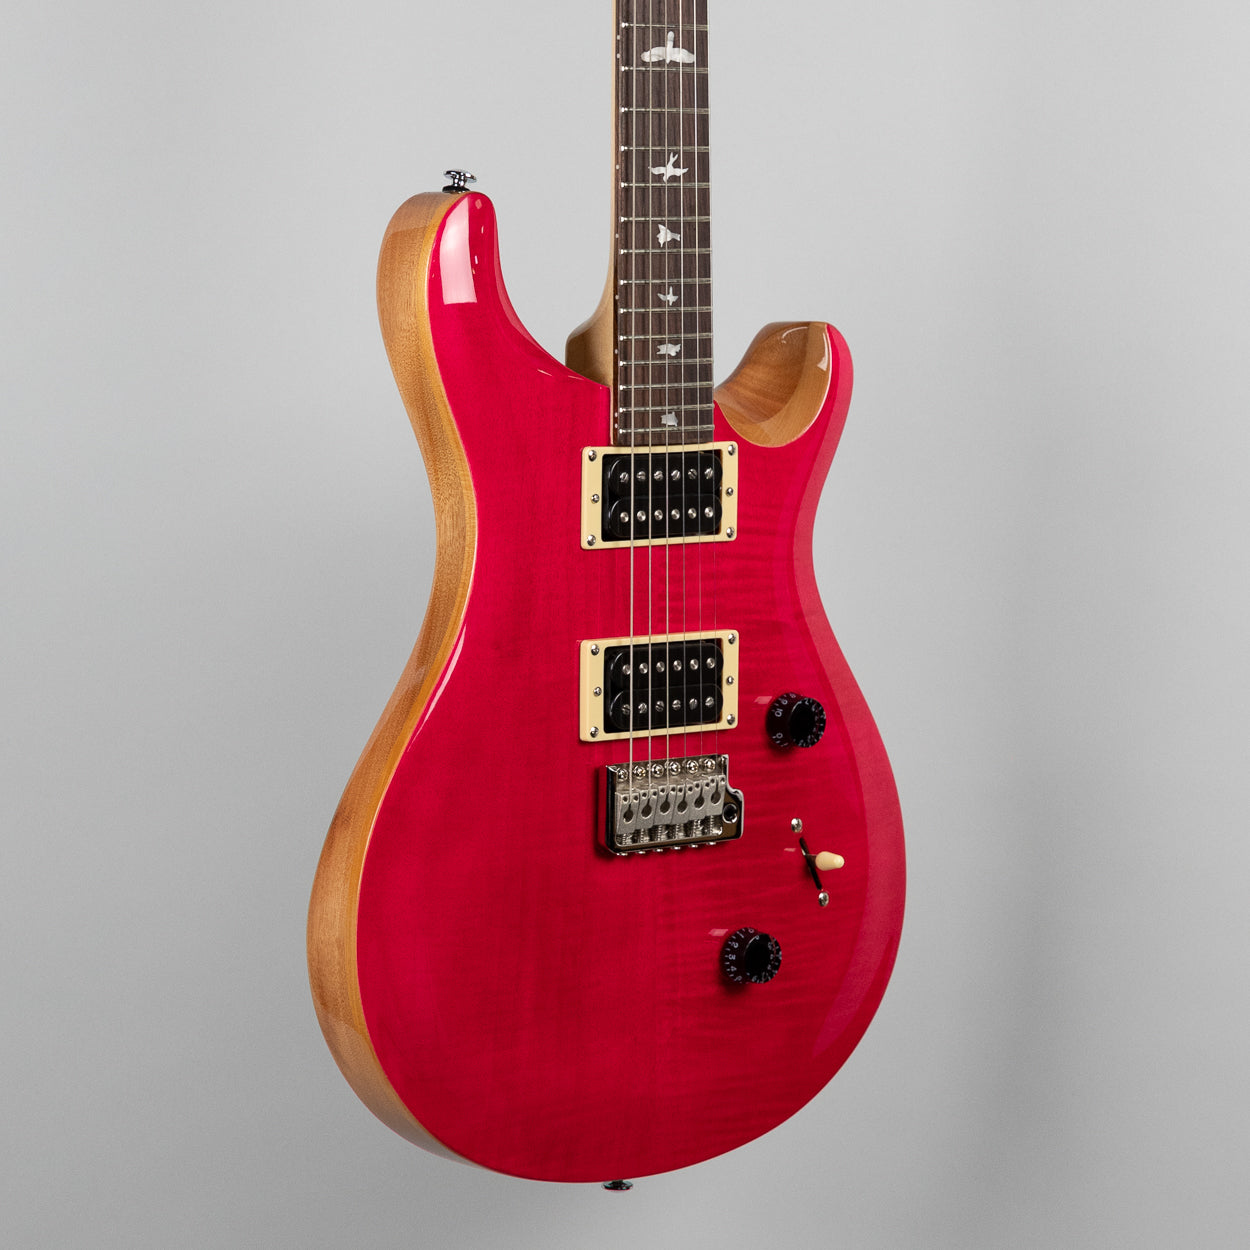 Paul Reed Smith SE Custom 24 in Bonnie Pink